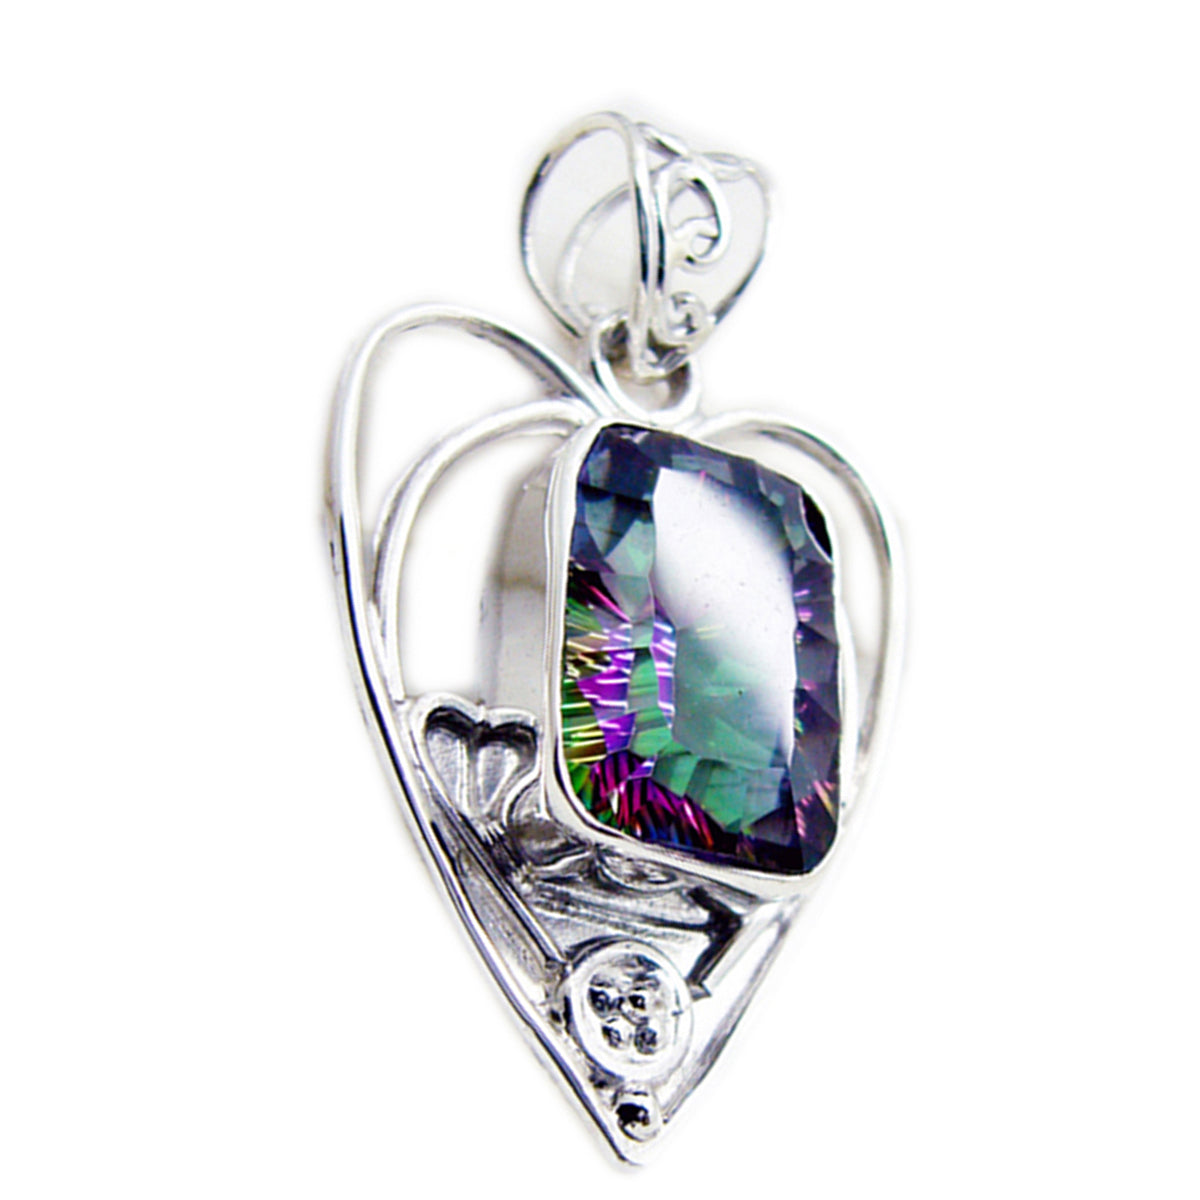 Riyo Charming Gems Octagon Faceted Multi Color Mystic Quartz Silver Pendant Gift For Wife